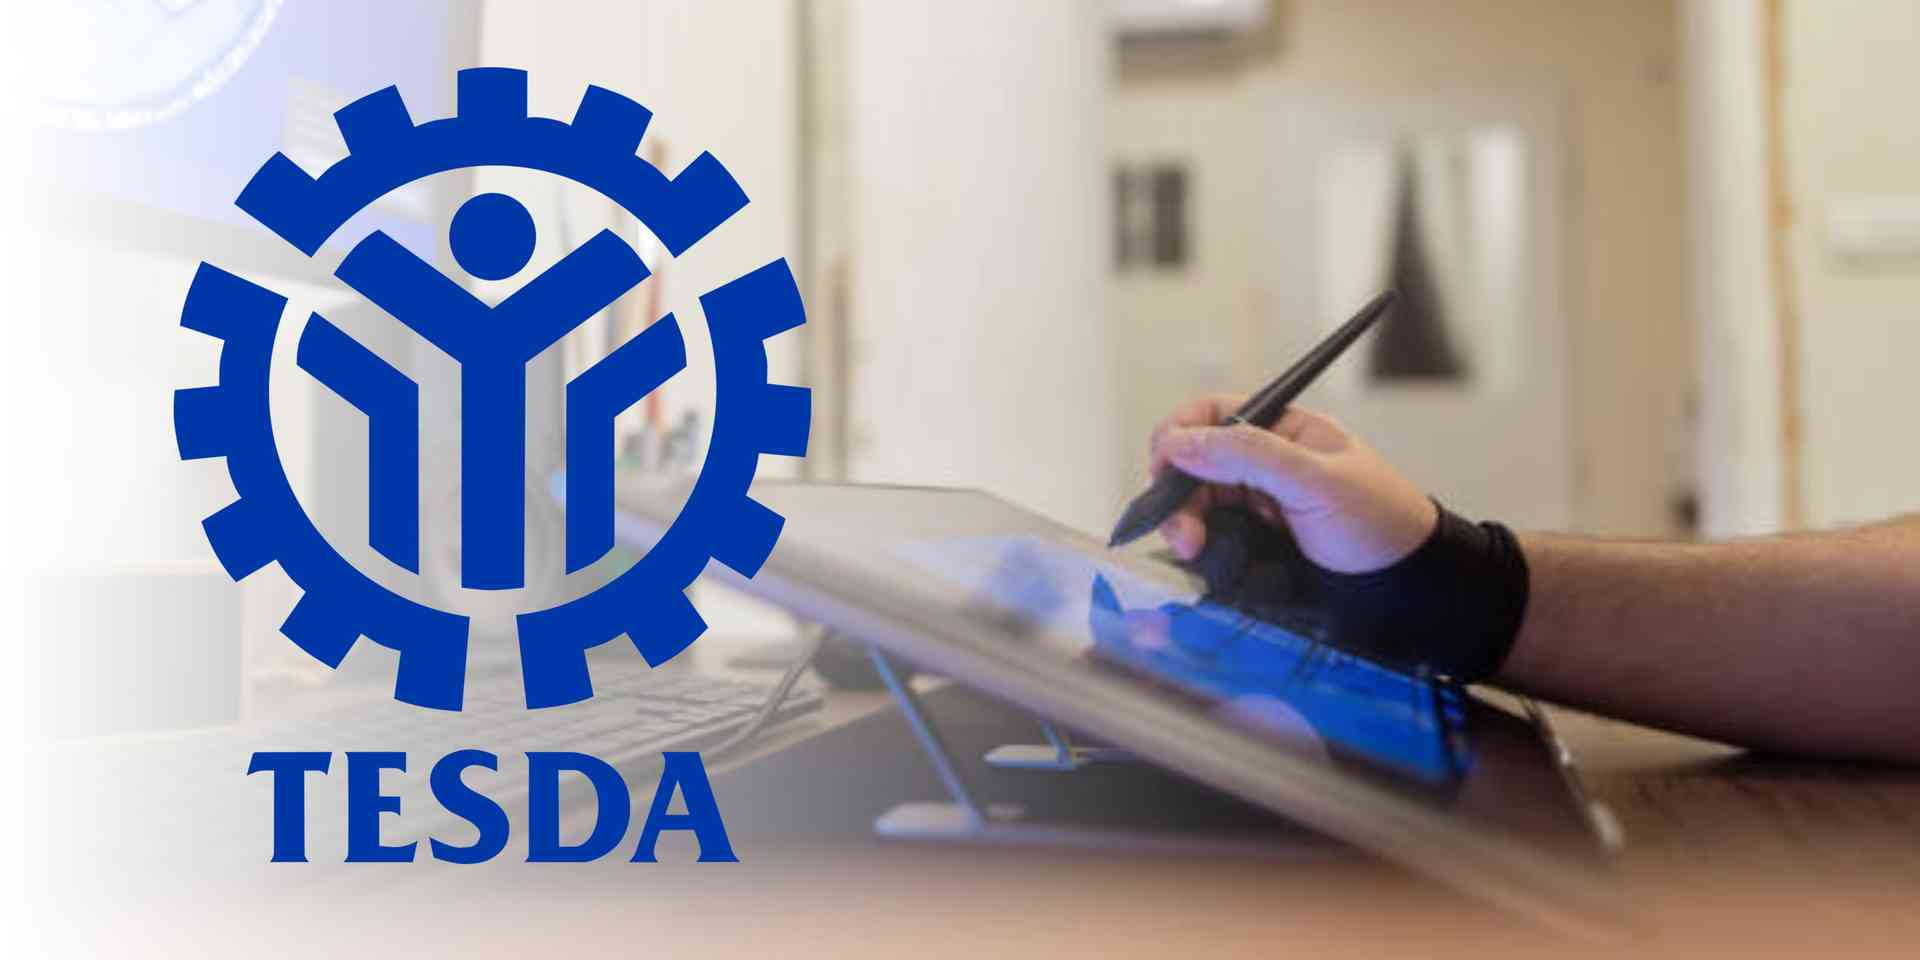 TESDA holds logo-making contest for new slogan